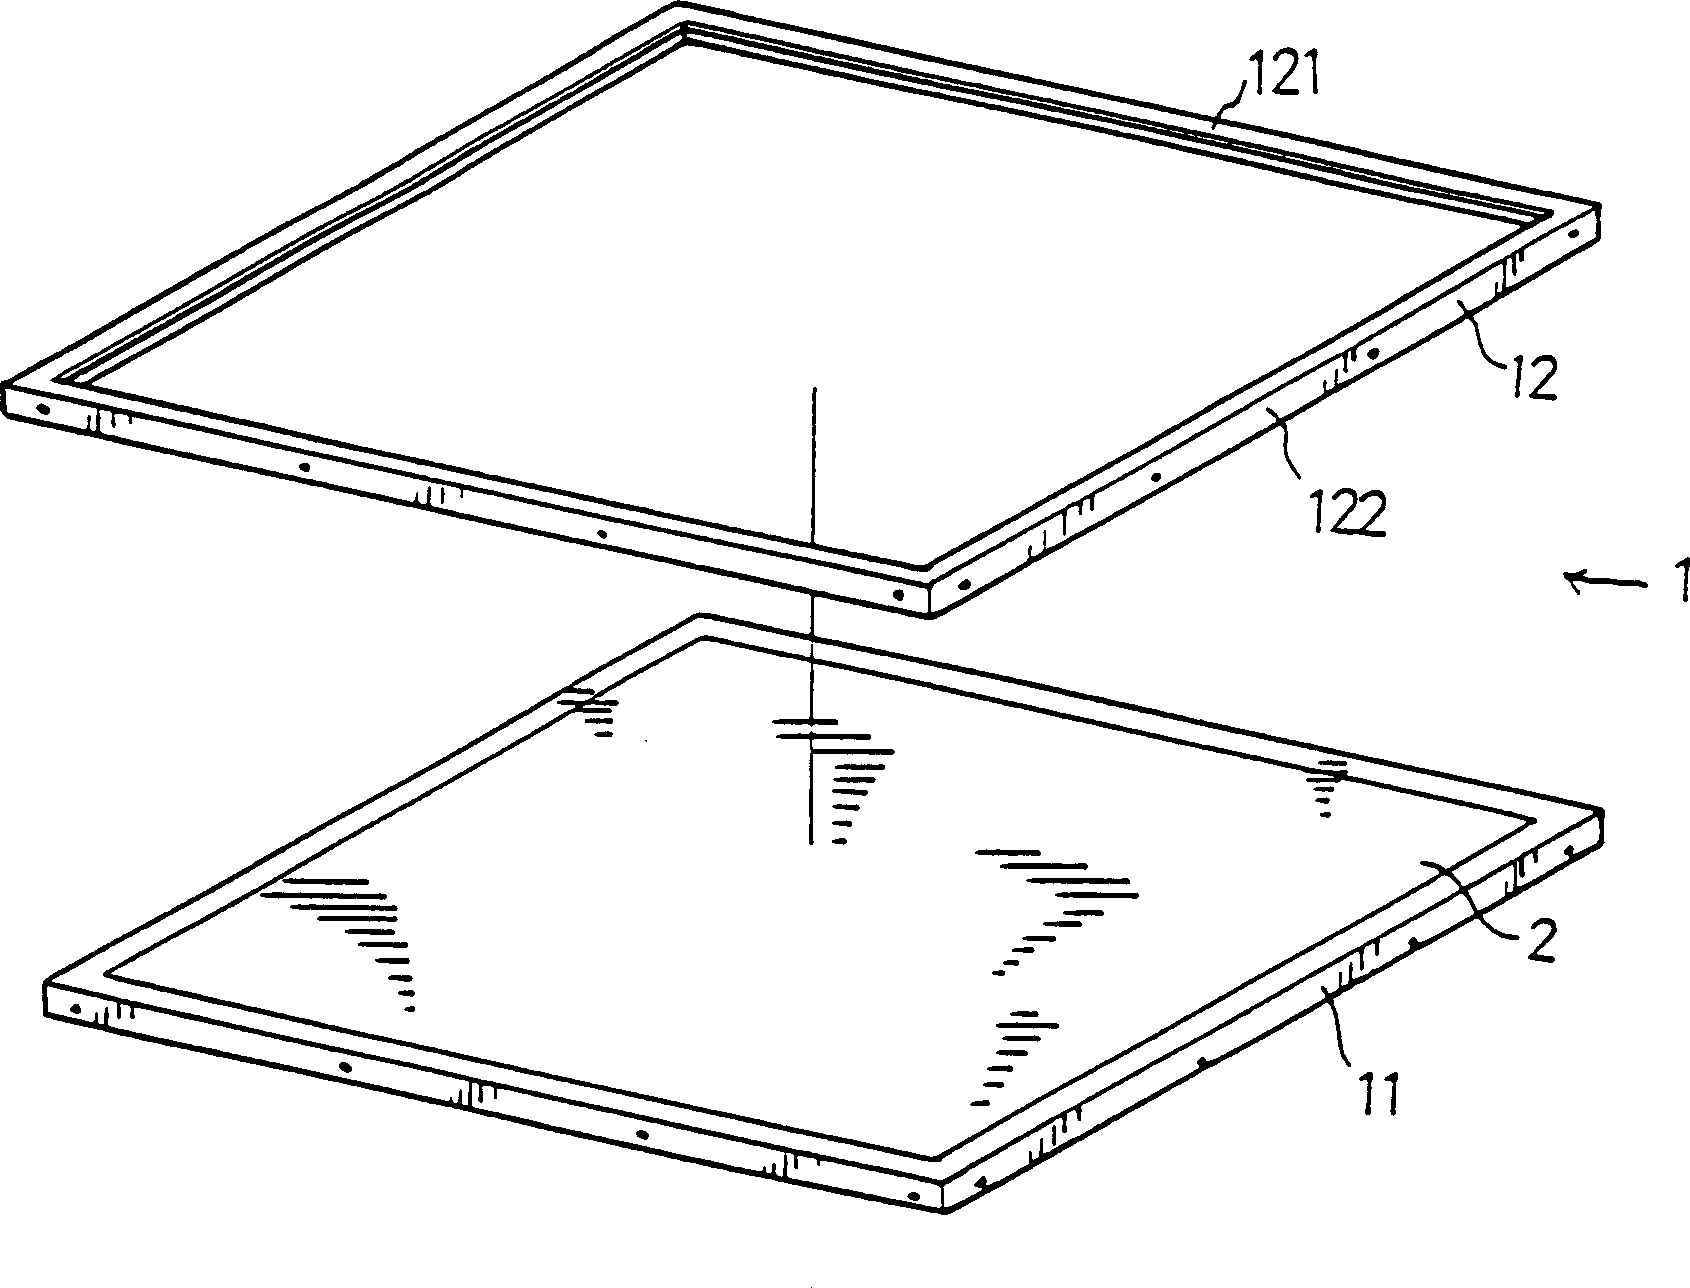 Liquid crystal display and its fixed frame